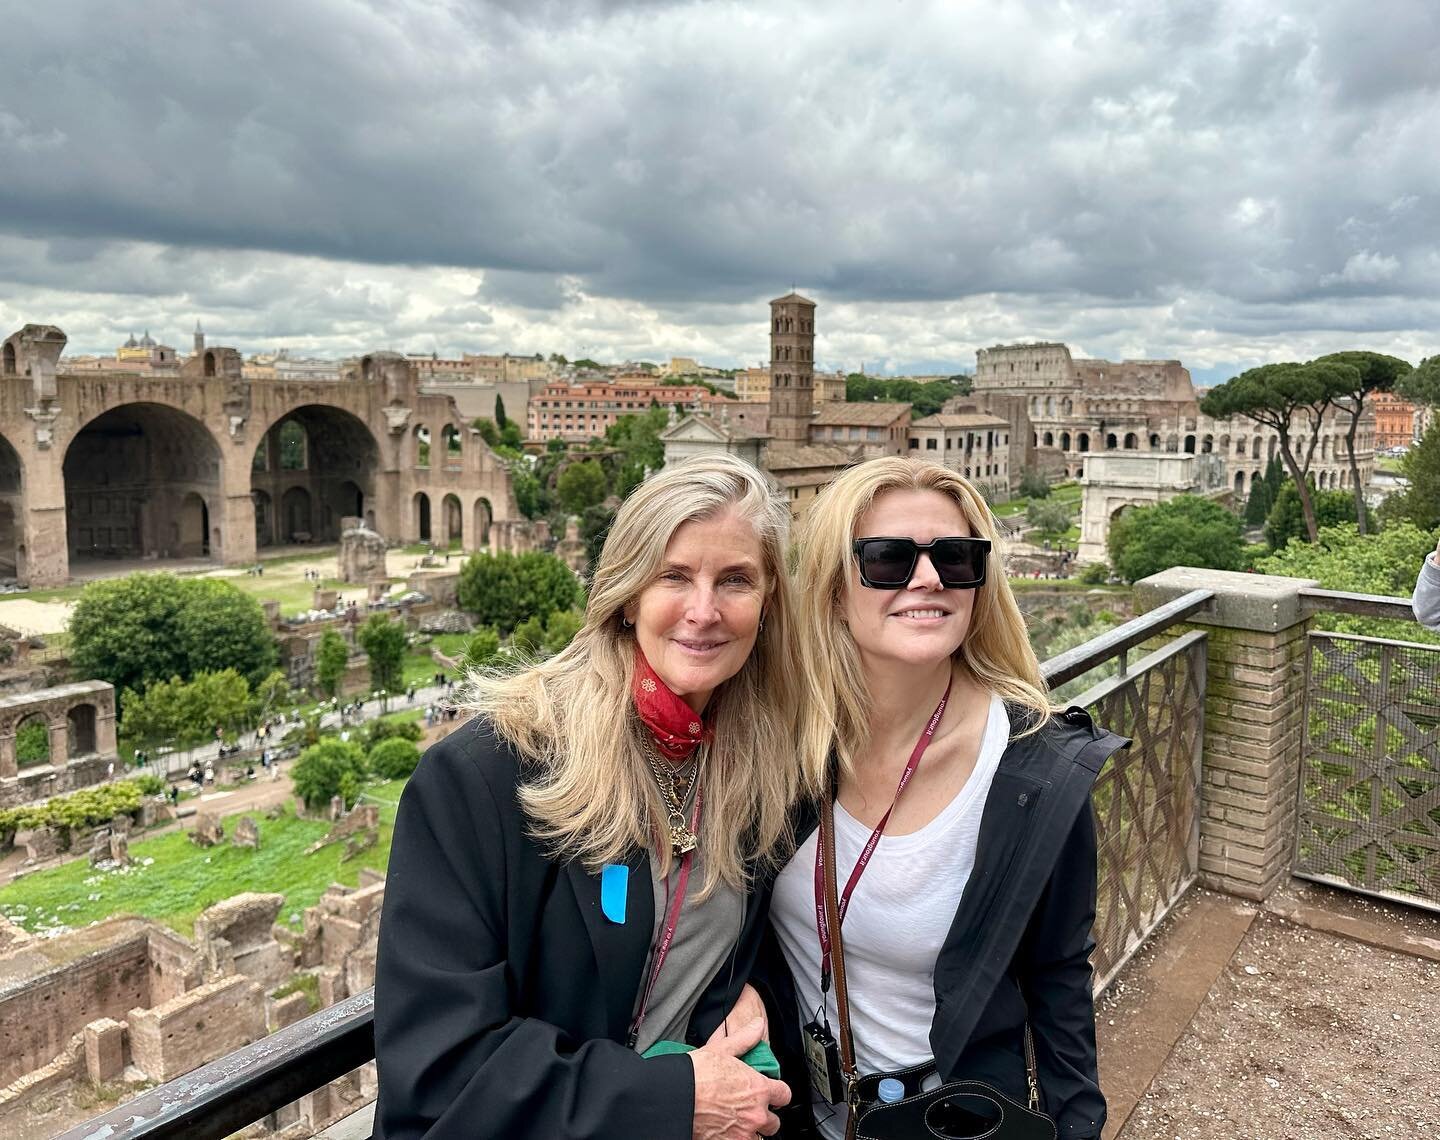 &quot;If adventures will not befall a young lady in her own village, she must seek them abroad.&quot; Jane Austen
#insearchofmrdarcy #abroadinlondon #travelismytherapy #exploretheworld #roma #lifeiswhatyoumakeit #girlswhotravel #travelrome #lifeissho